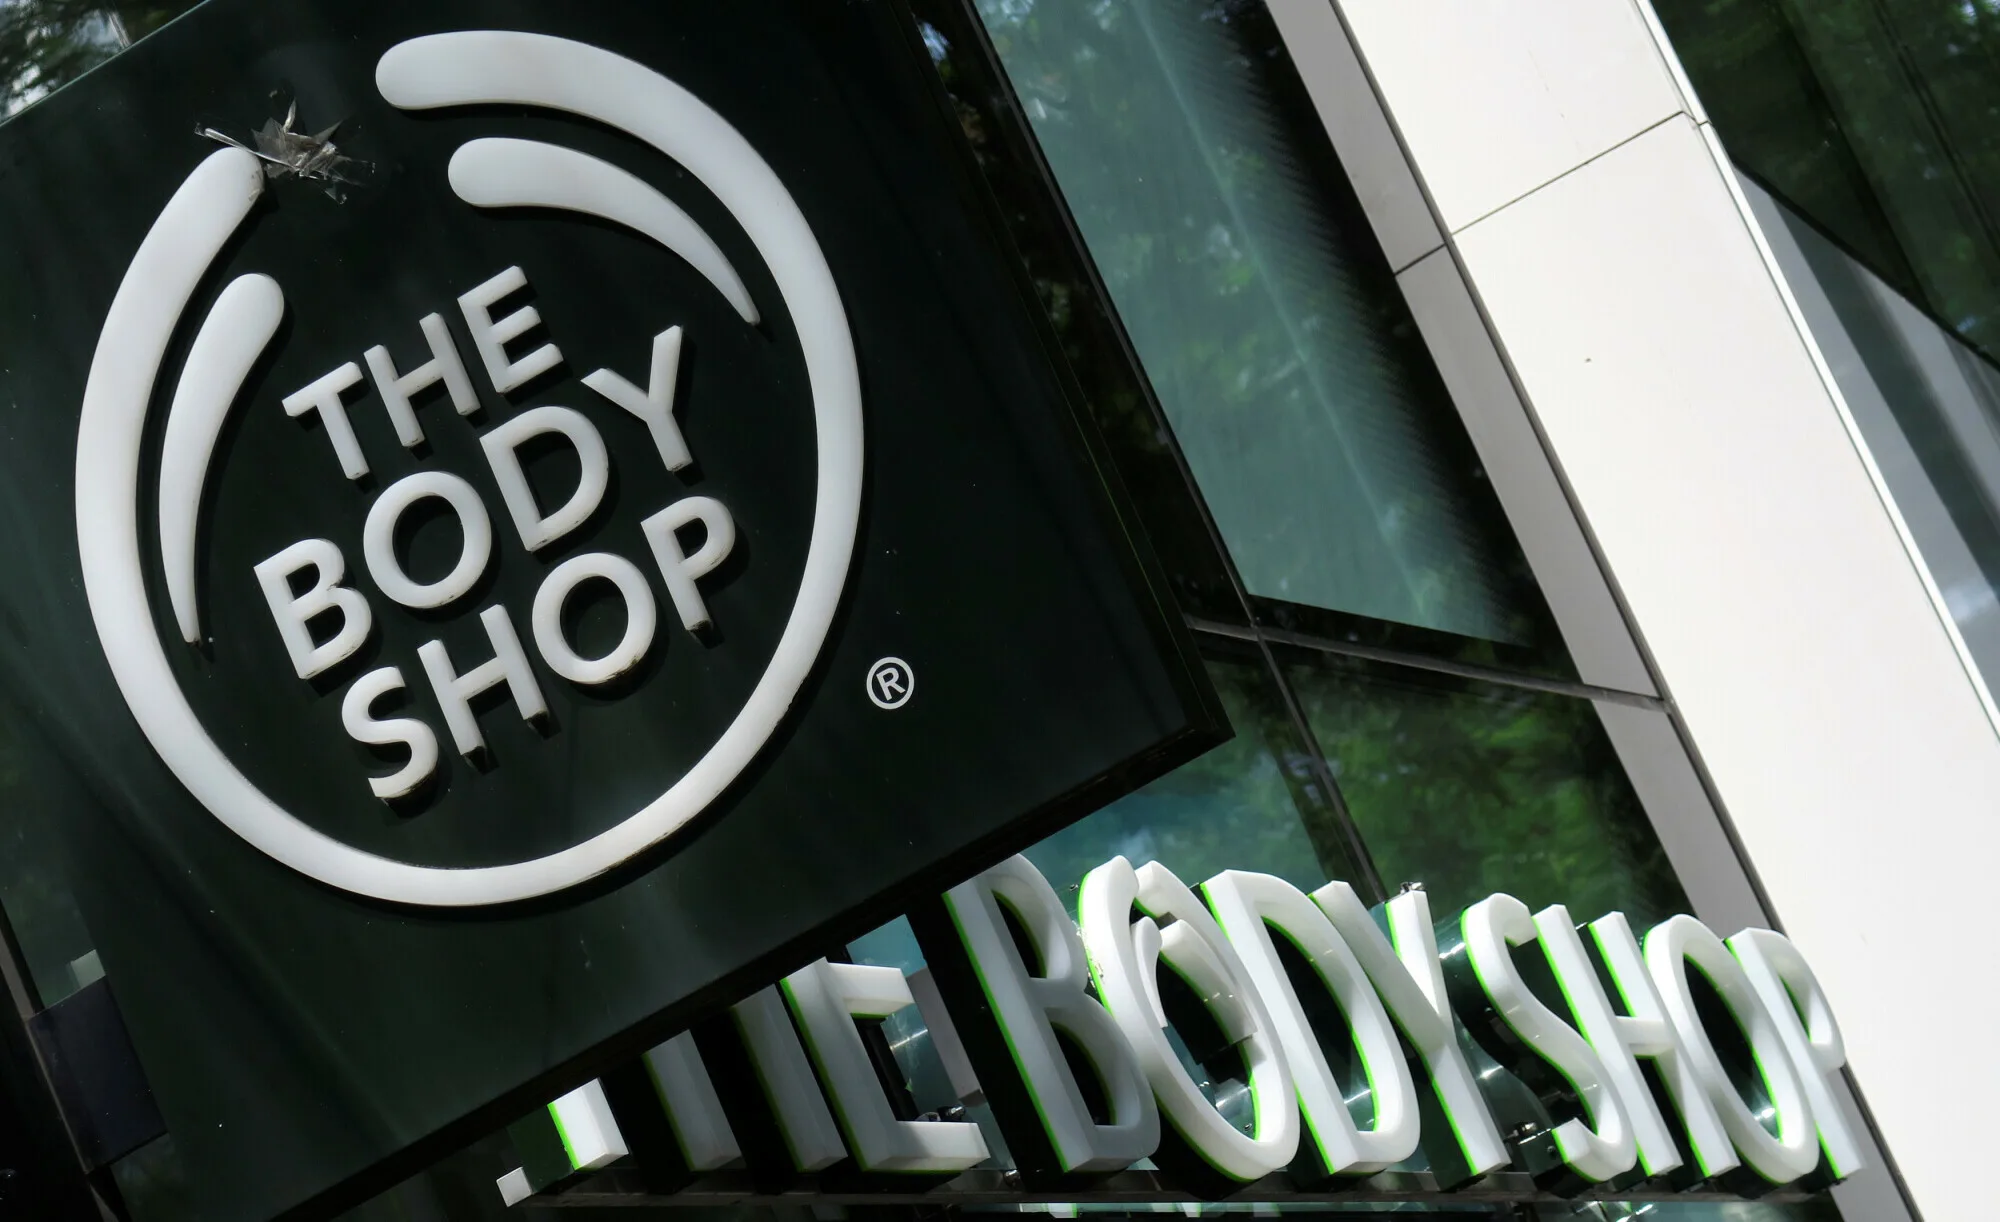 The Body Shop goes bankrupt in the UK